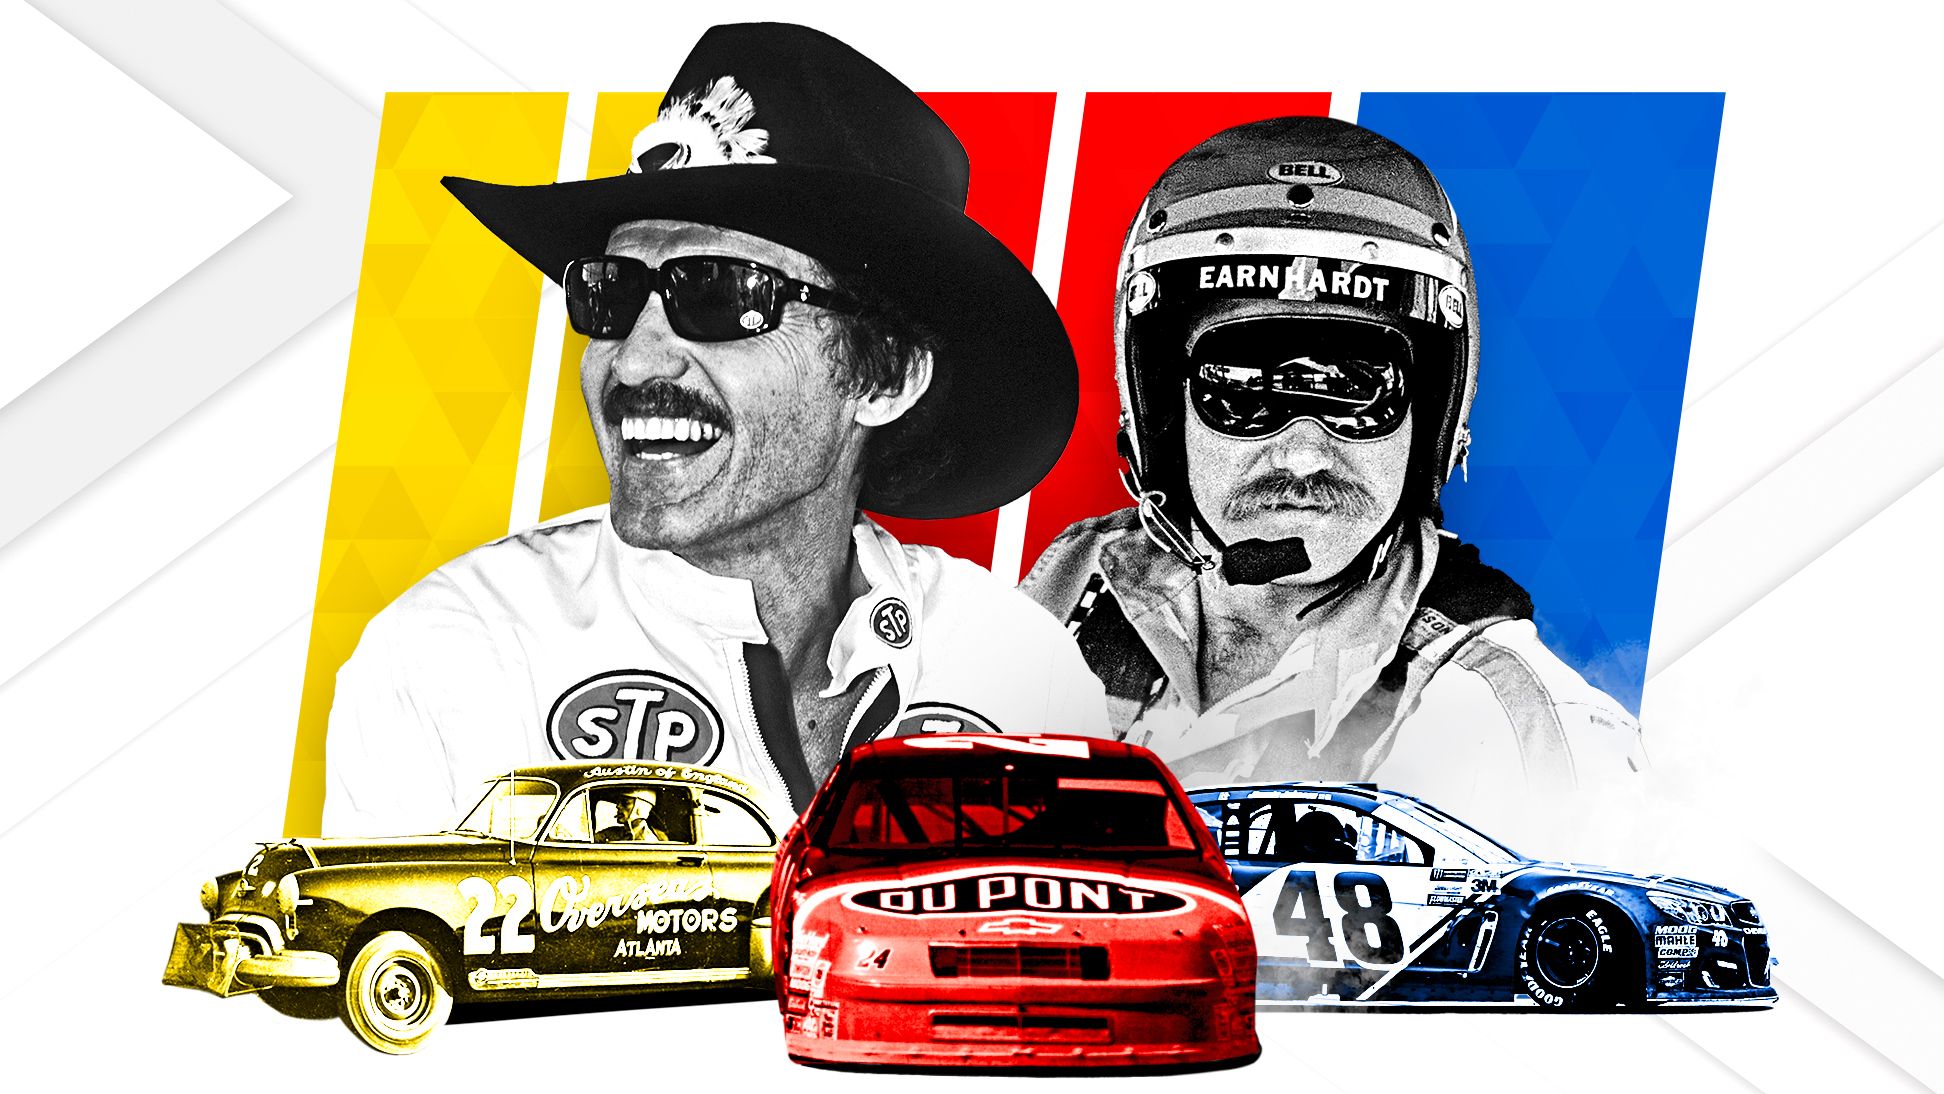 75 things for NASCAR's 75th anniversary: Greatest rivalries